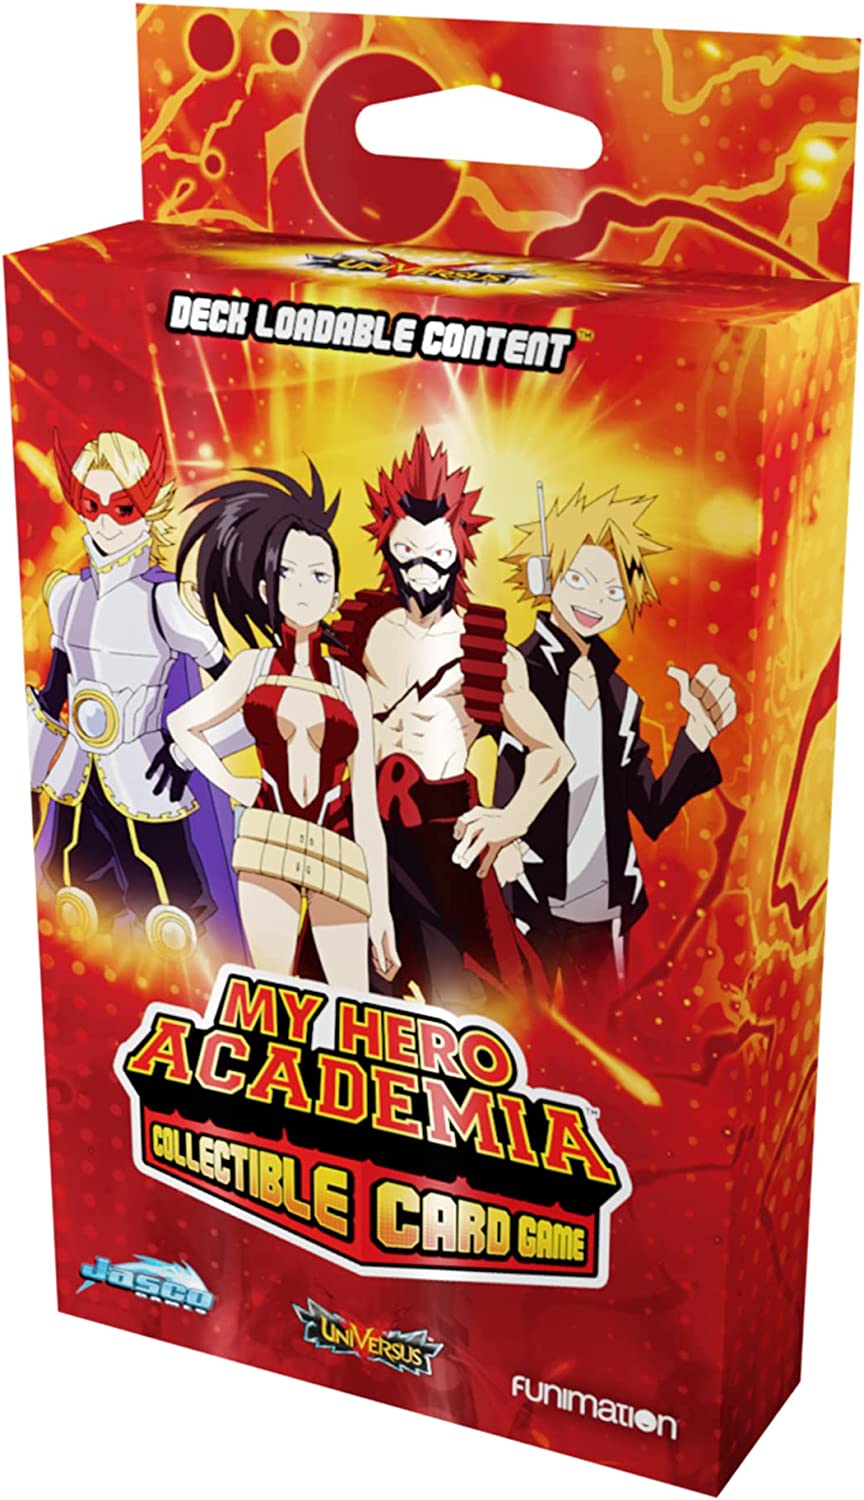 My Hero Academia Collectible Card Game Deck Loadable Content Series 2 Crimson Rampage